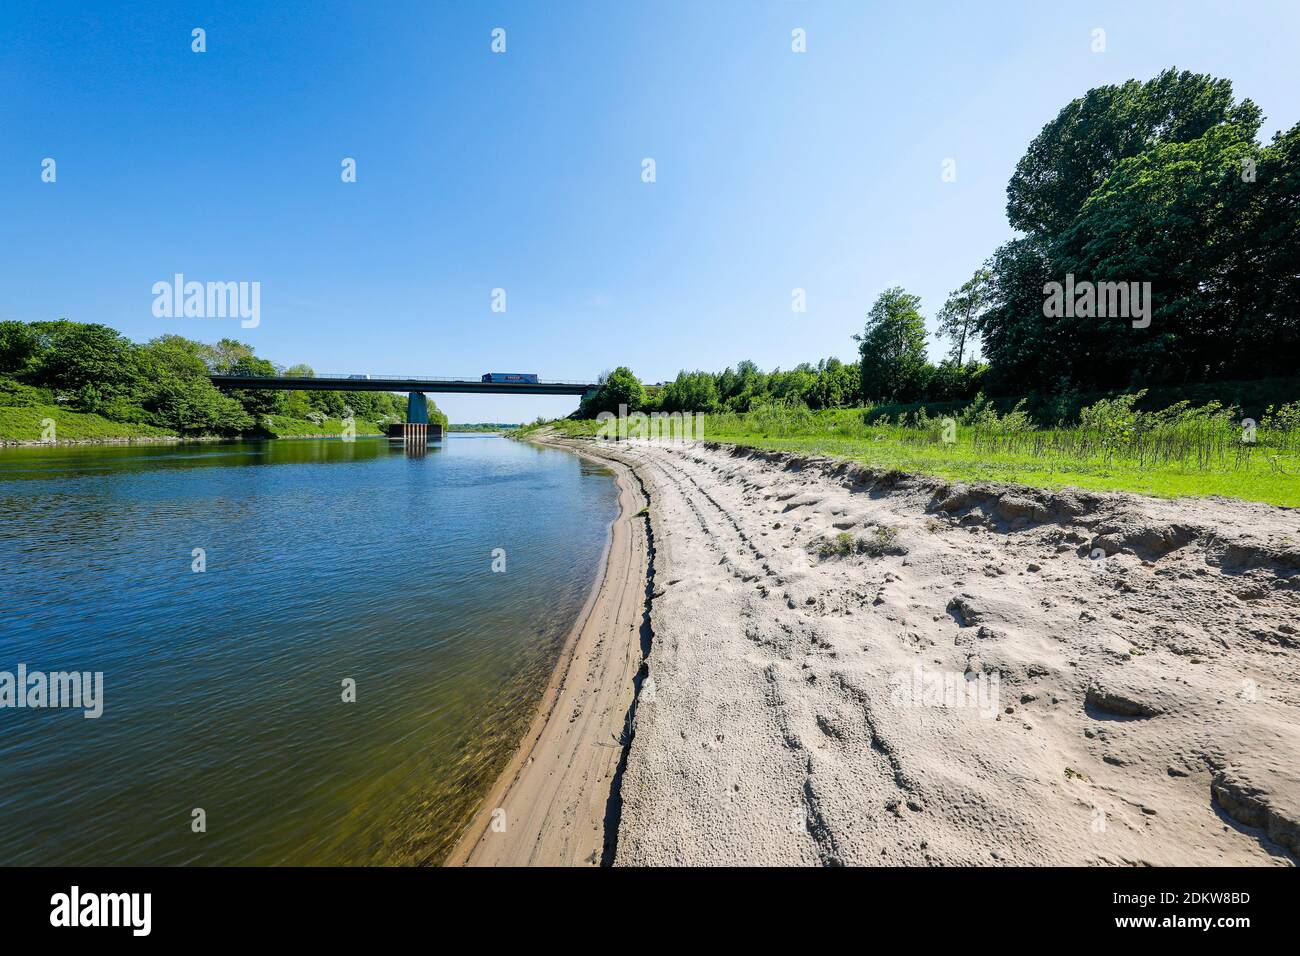 Wesel, North Rhine-Westphalia, Lower Rhine, Germany, river Lippe at the mouth of the river Lippe, looking upstream in direction of the bridge Schillst Stock Photo